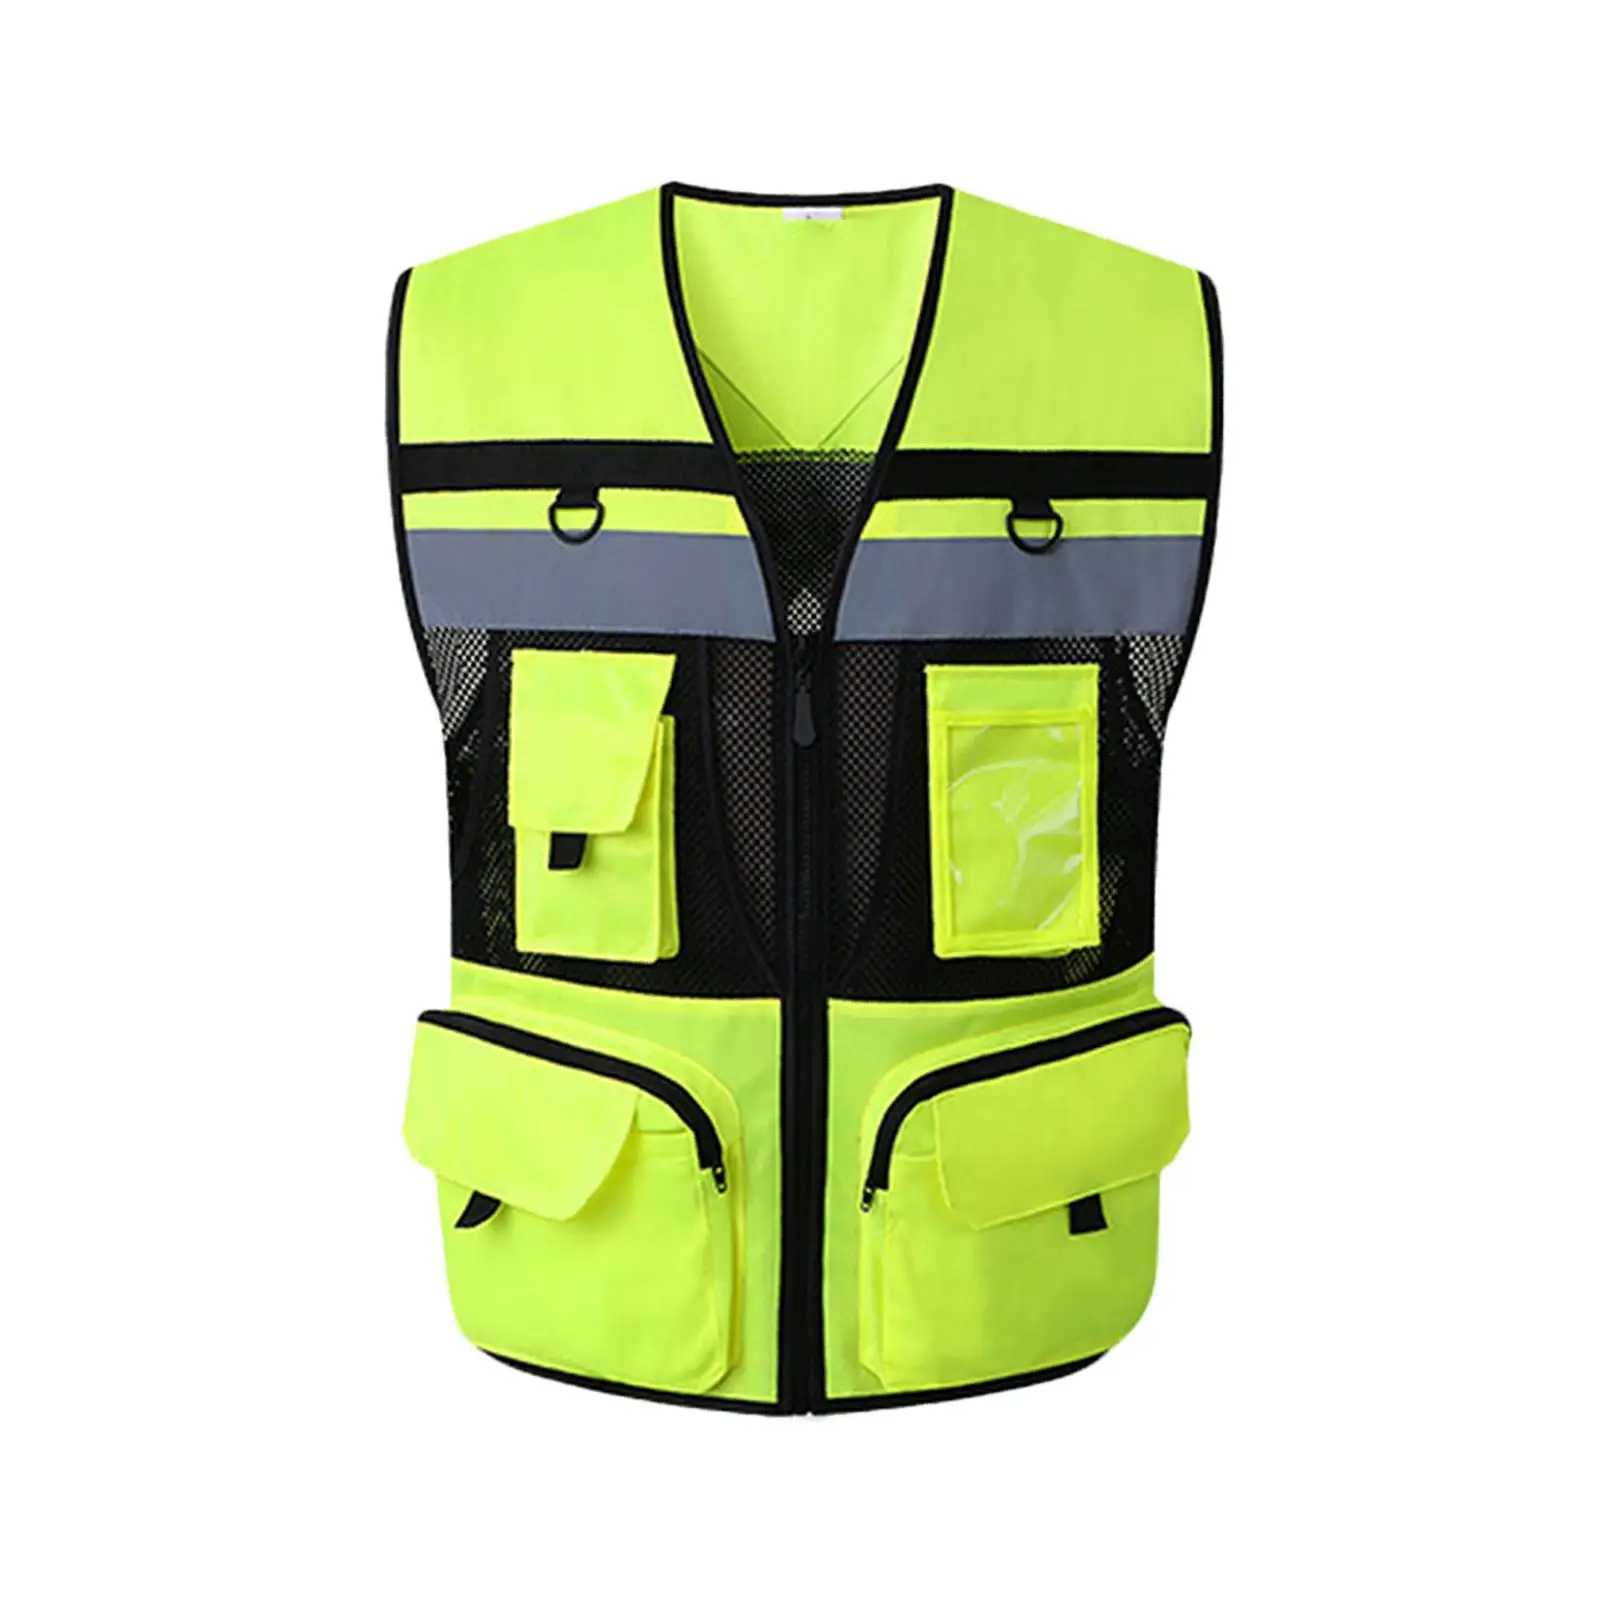 Reflective Vest High Visibility Safety Vest for Airport Ground Staff Workers Engineers